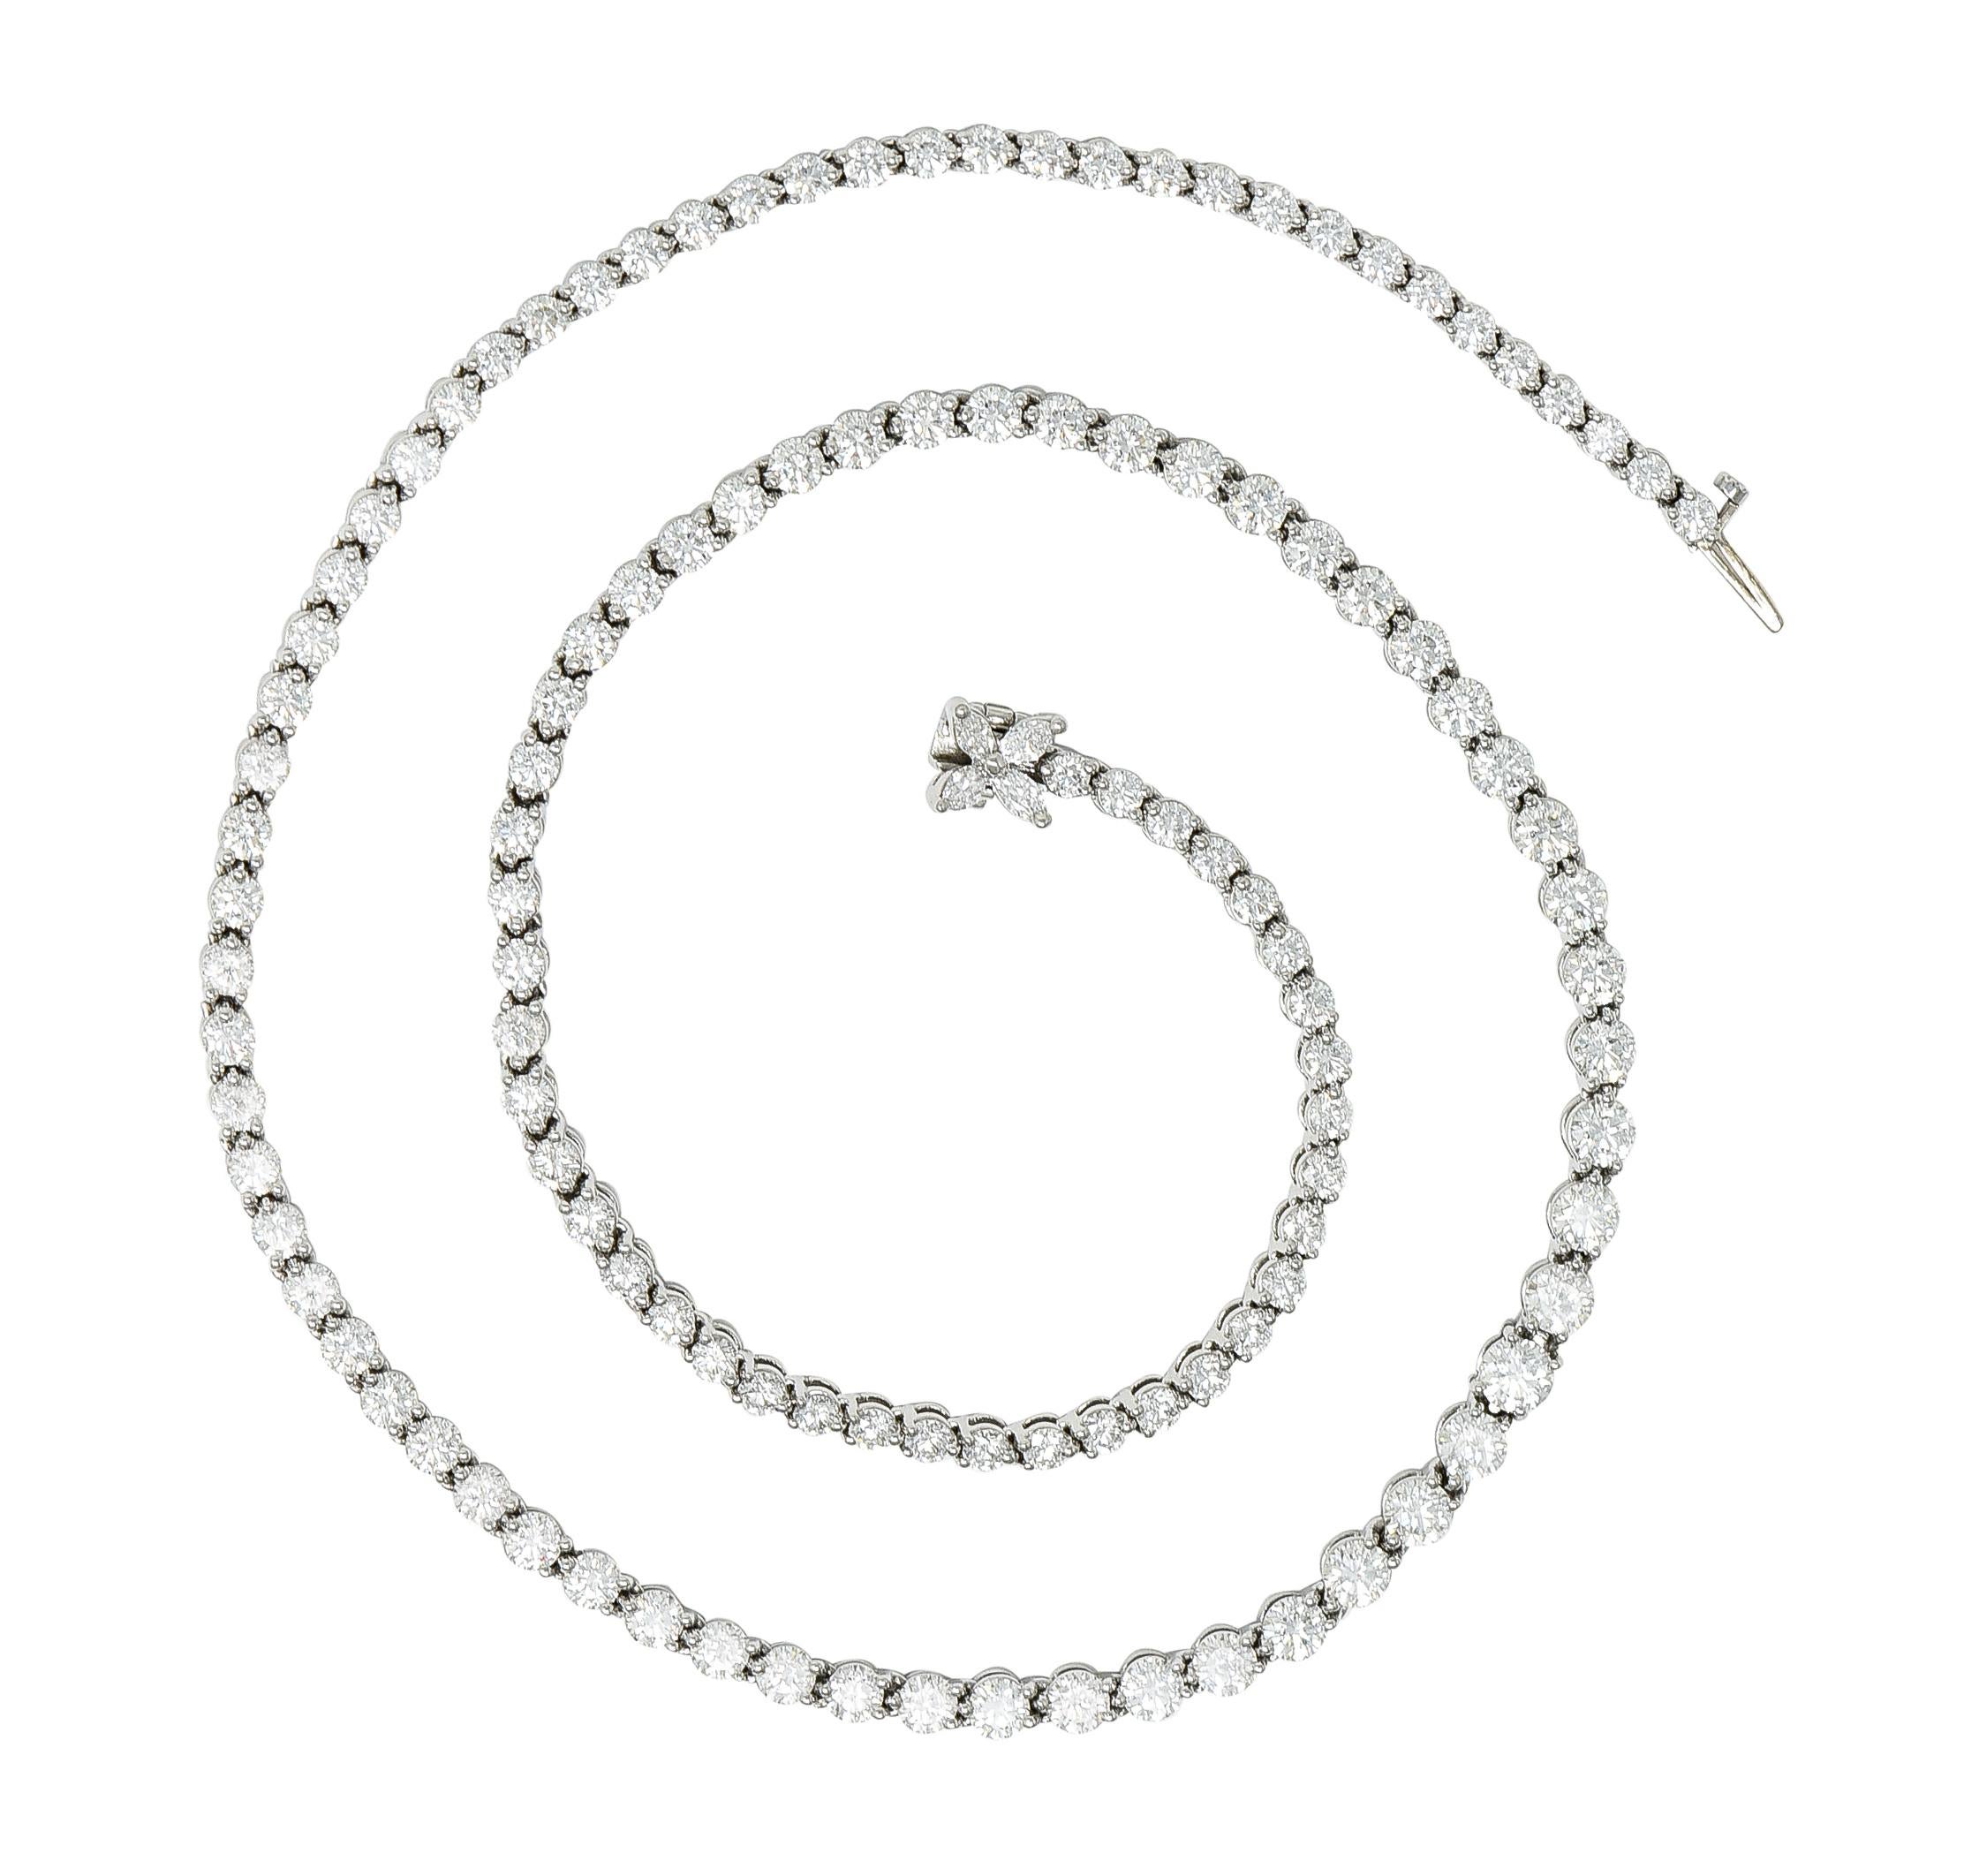 Designed as hinged platinum basket links each centering round brilliant cut diamonds. Weighing approximately 10.18 carats total - F/G color with VS clarity. Prong set and graduating in size with stylized floral clasp. Featuring well matched prong